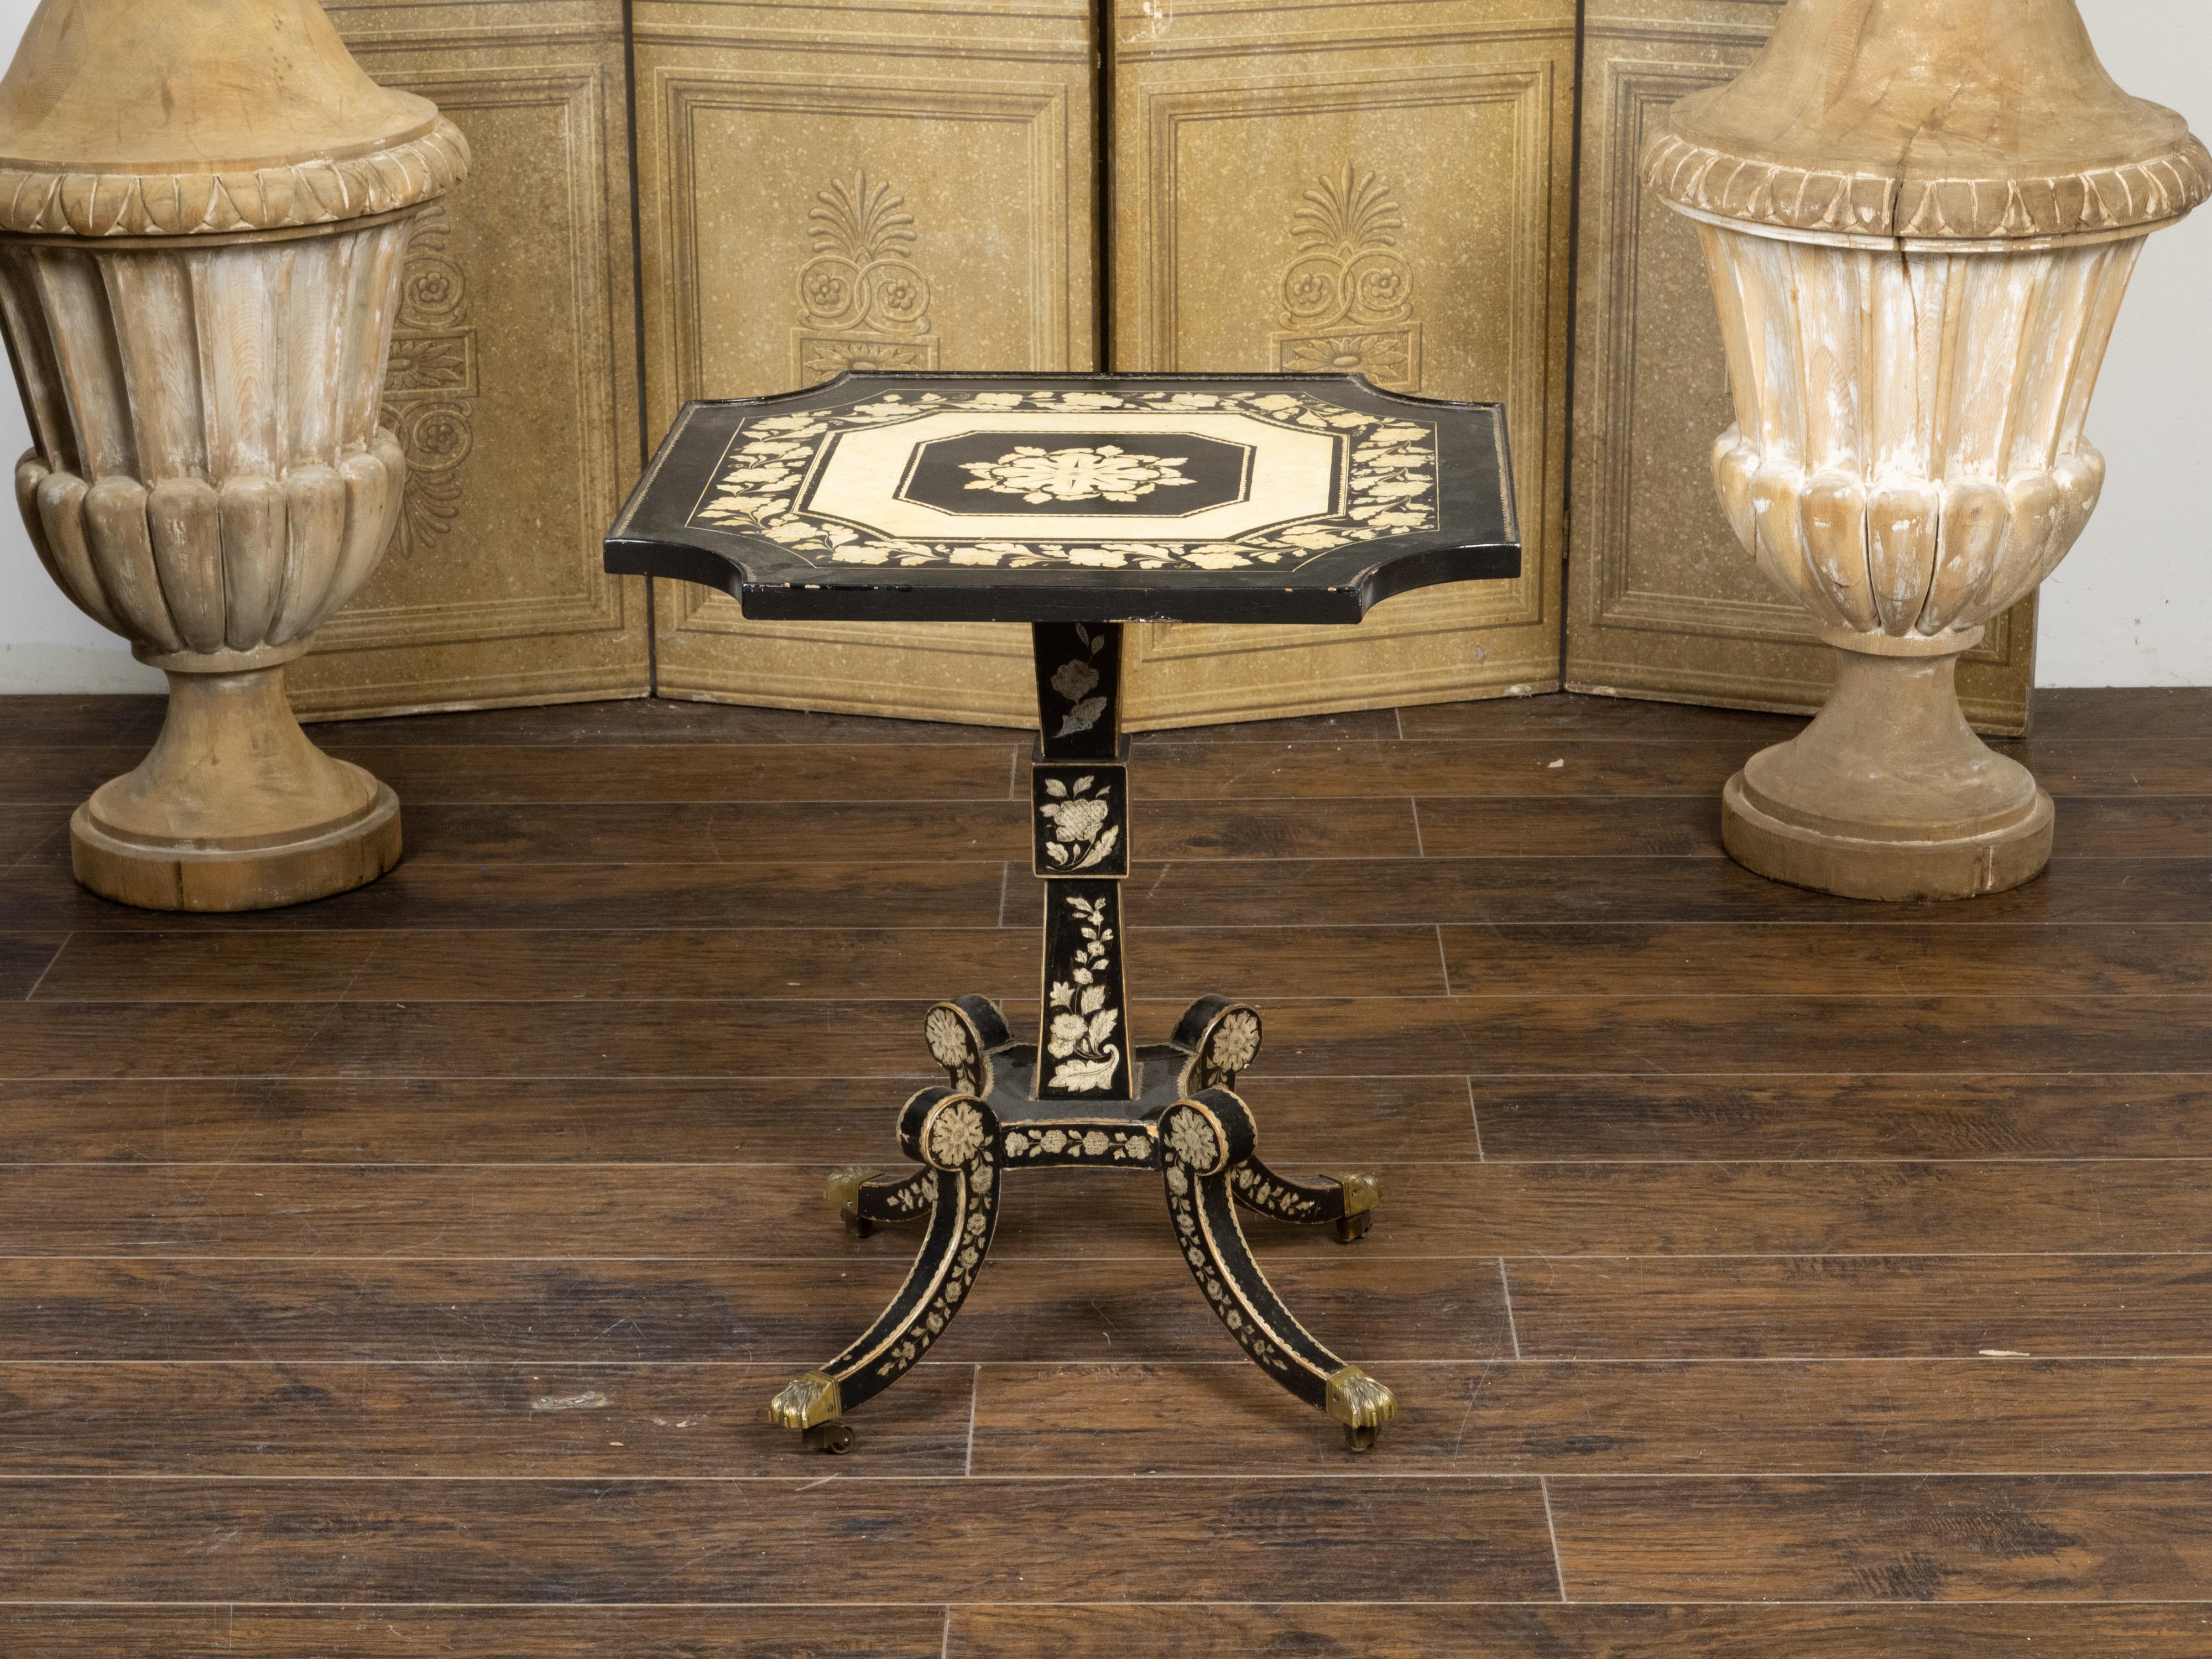 English Regency Penwork Occasional Table with Floral Décor and Curving Legs In Good Condition For Sale In Atlanta, GA